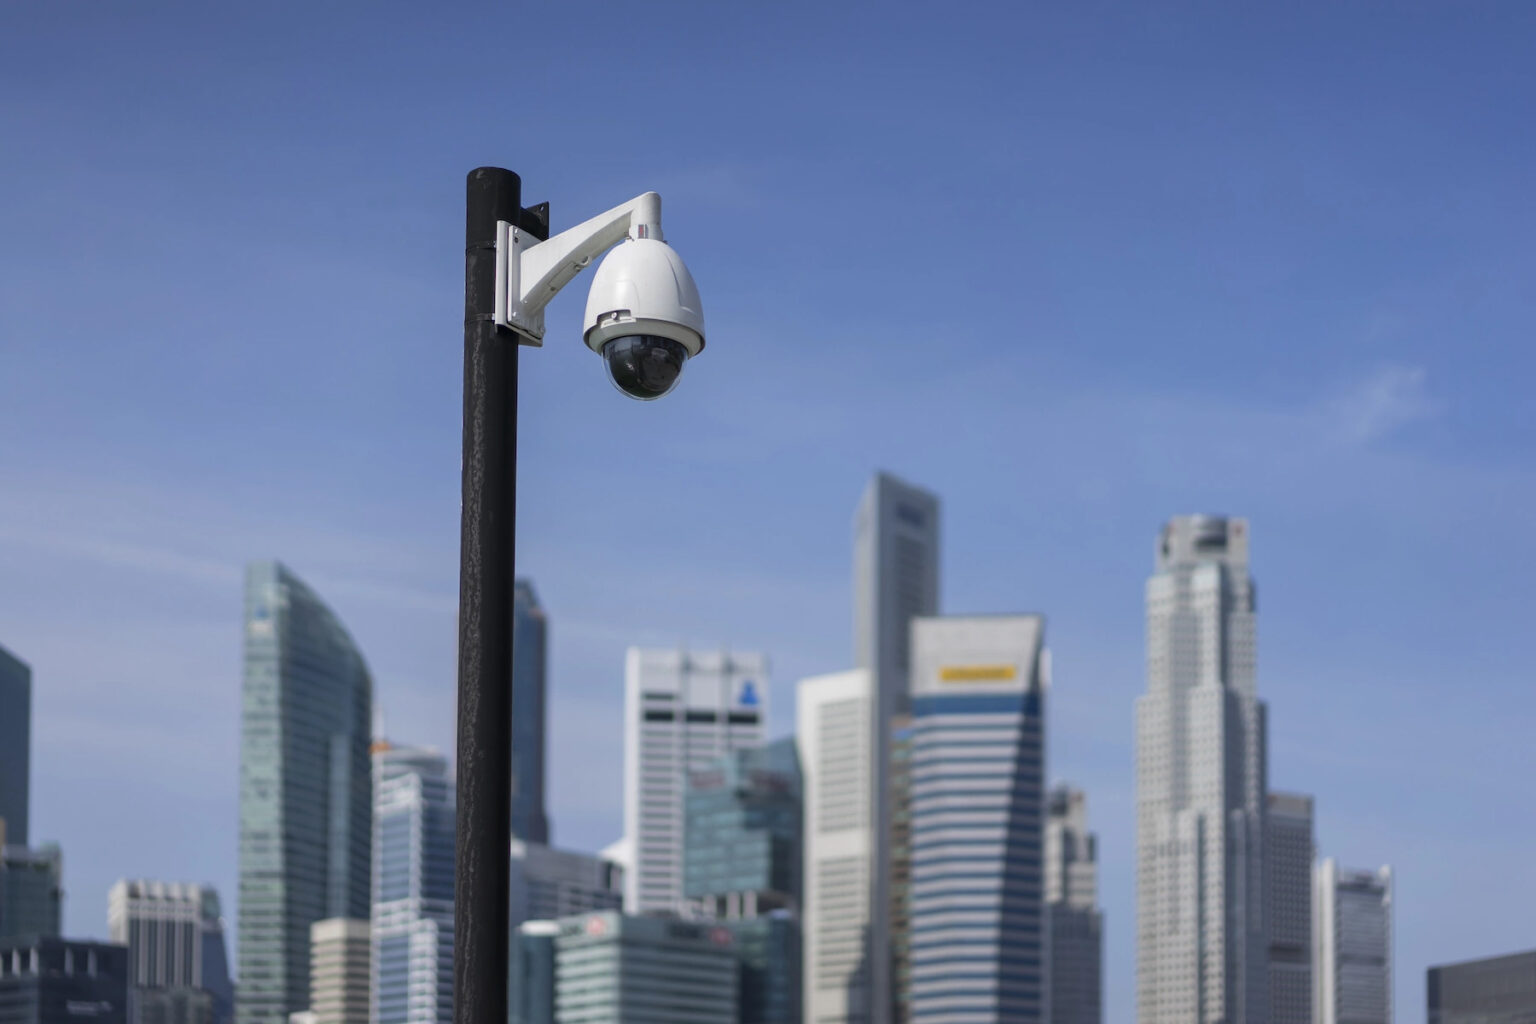 Street CCTV camera mounted on a pole - Singapore high rises in background